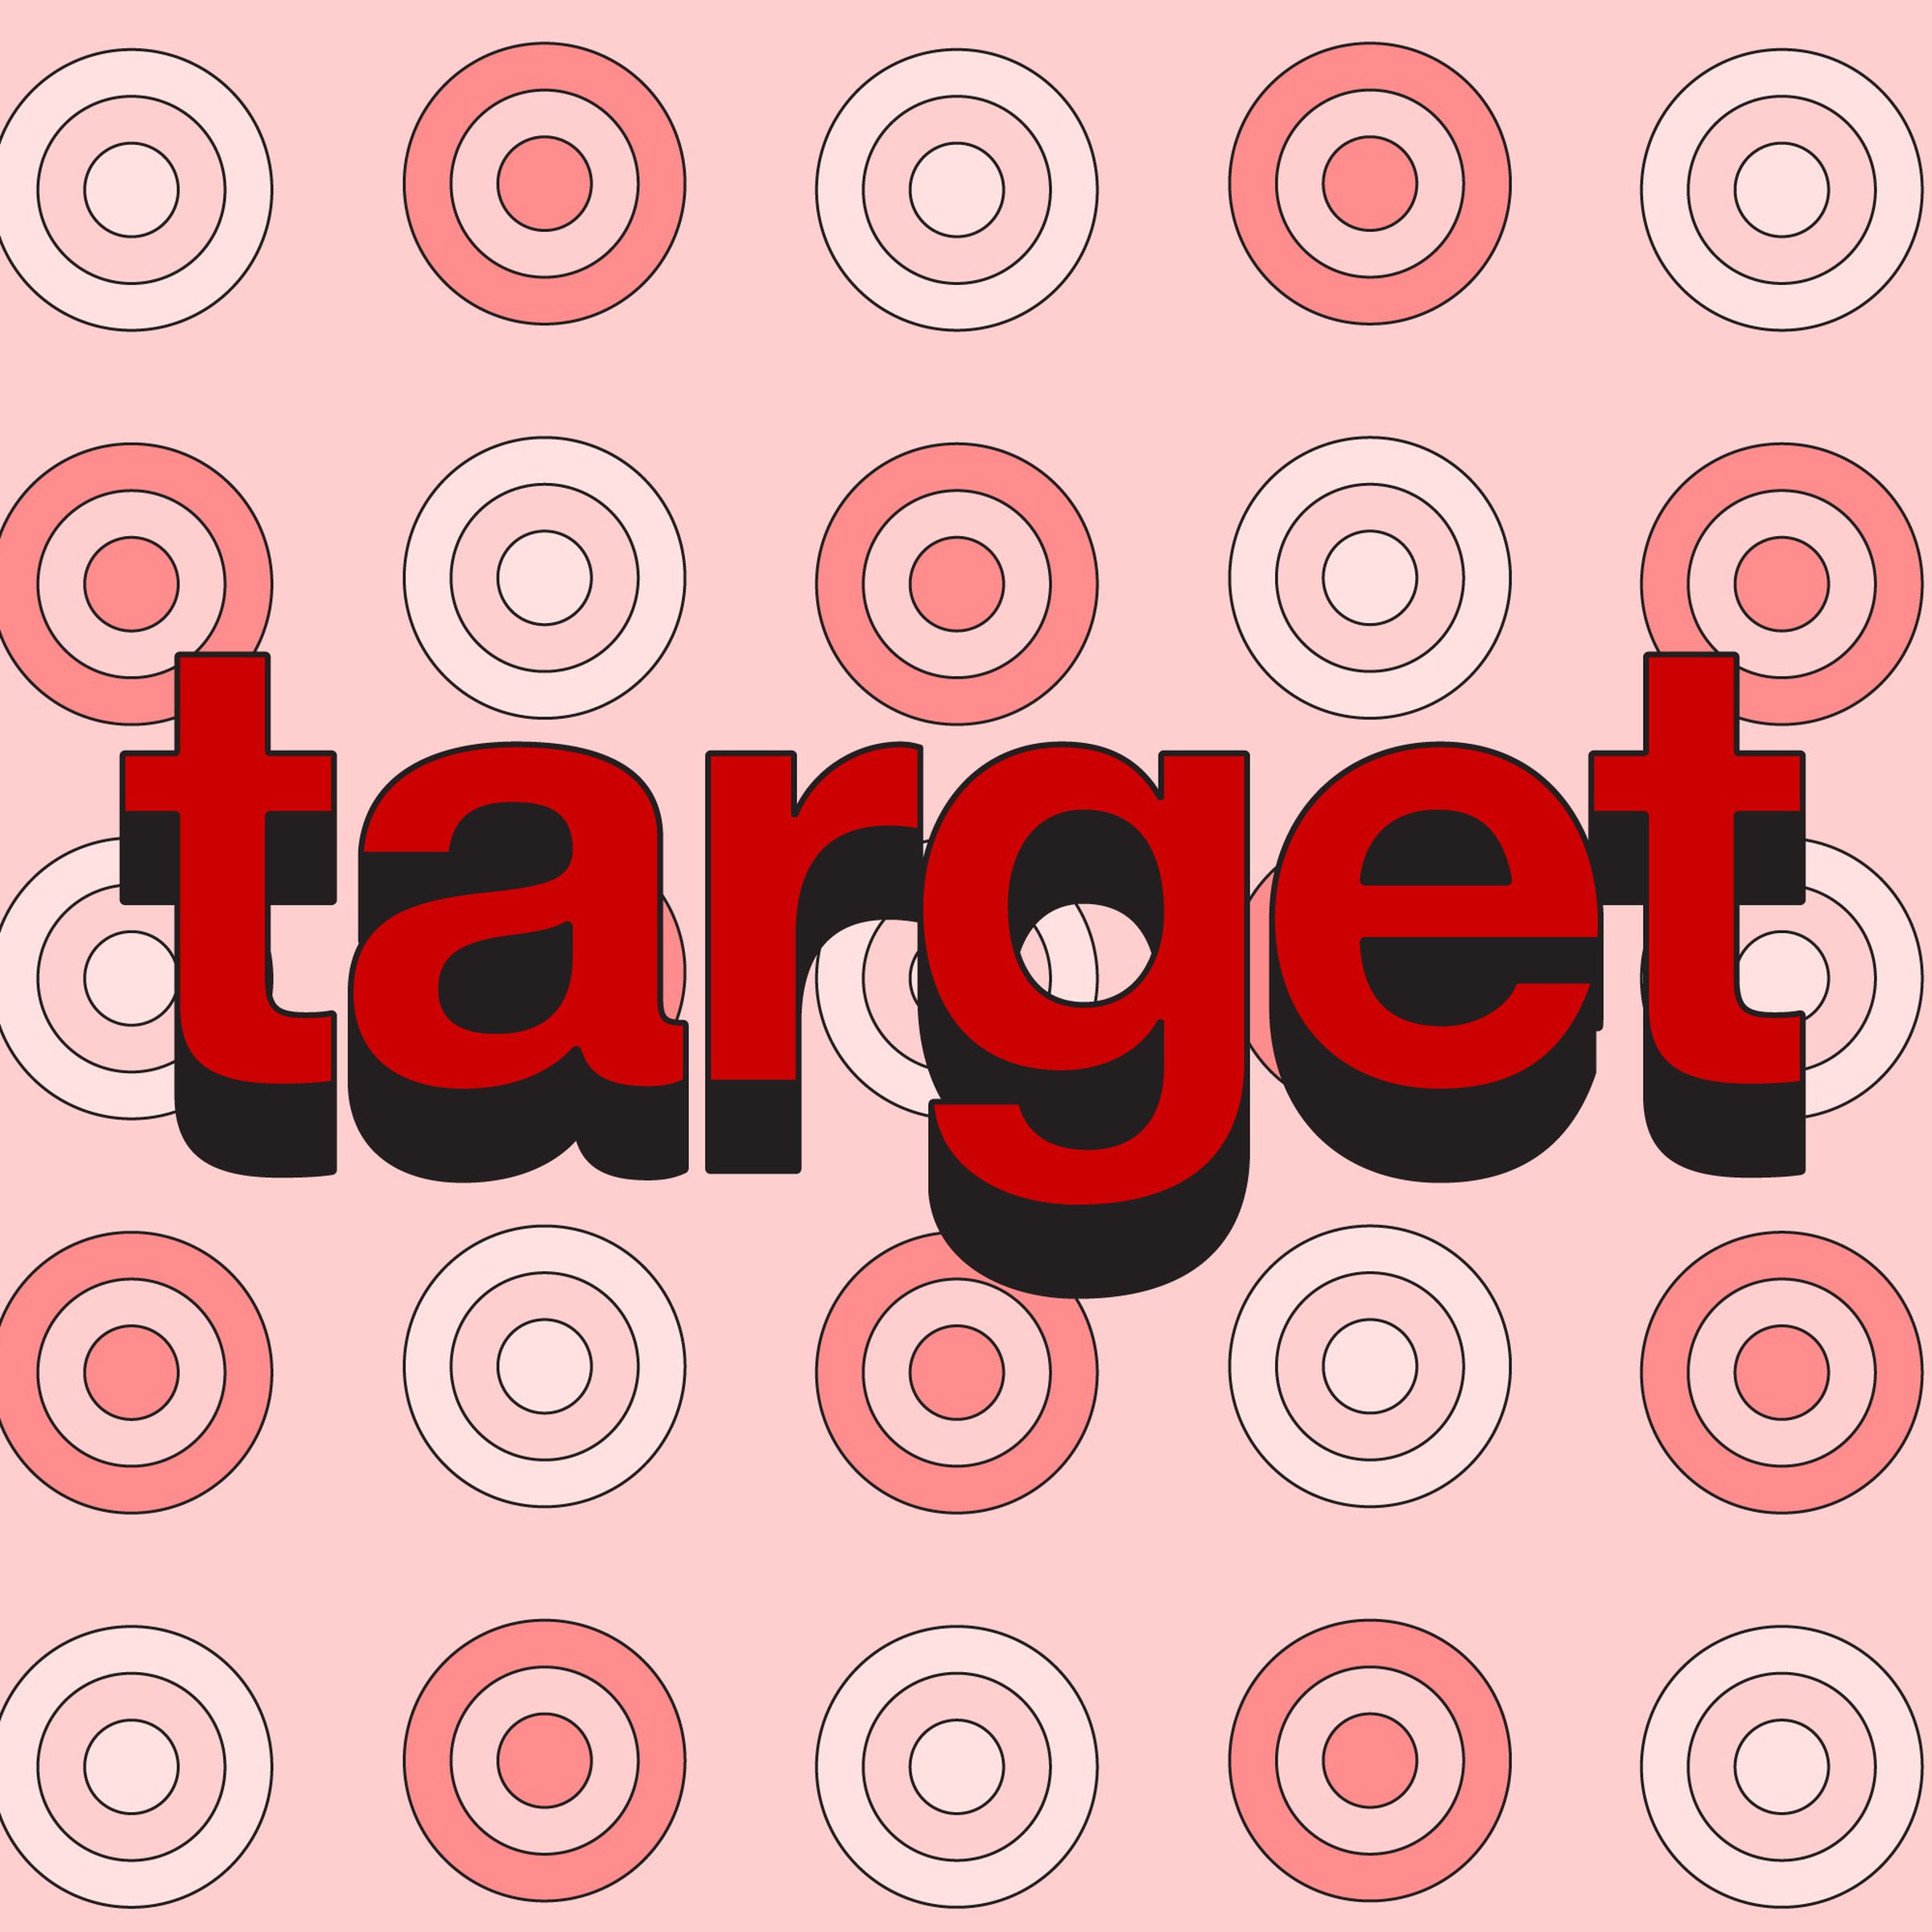 The Target logo over a repeating pink and white bullseye illustration